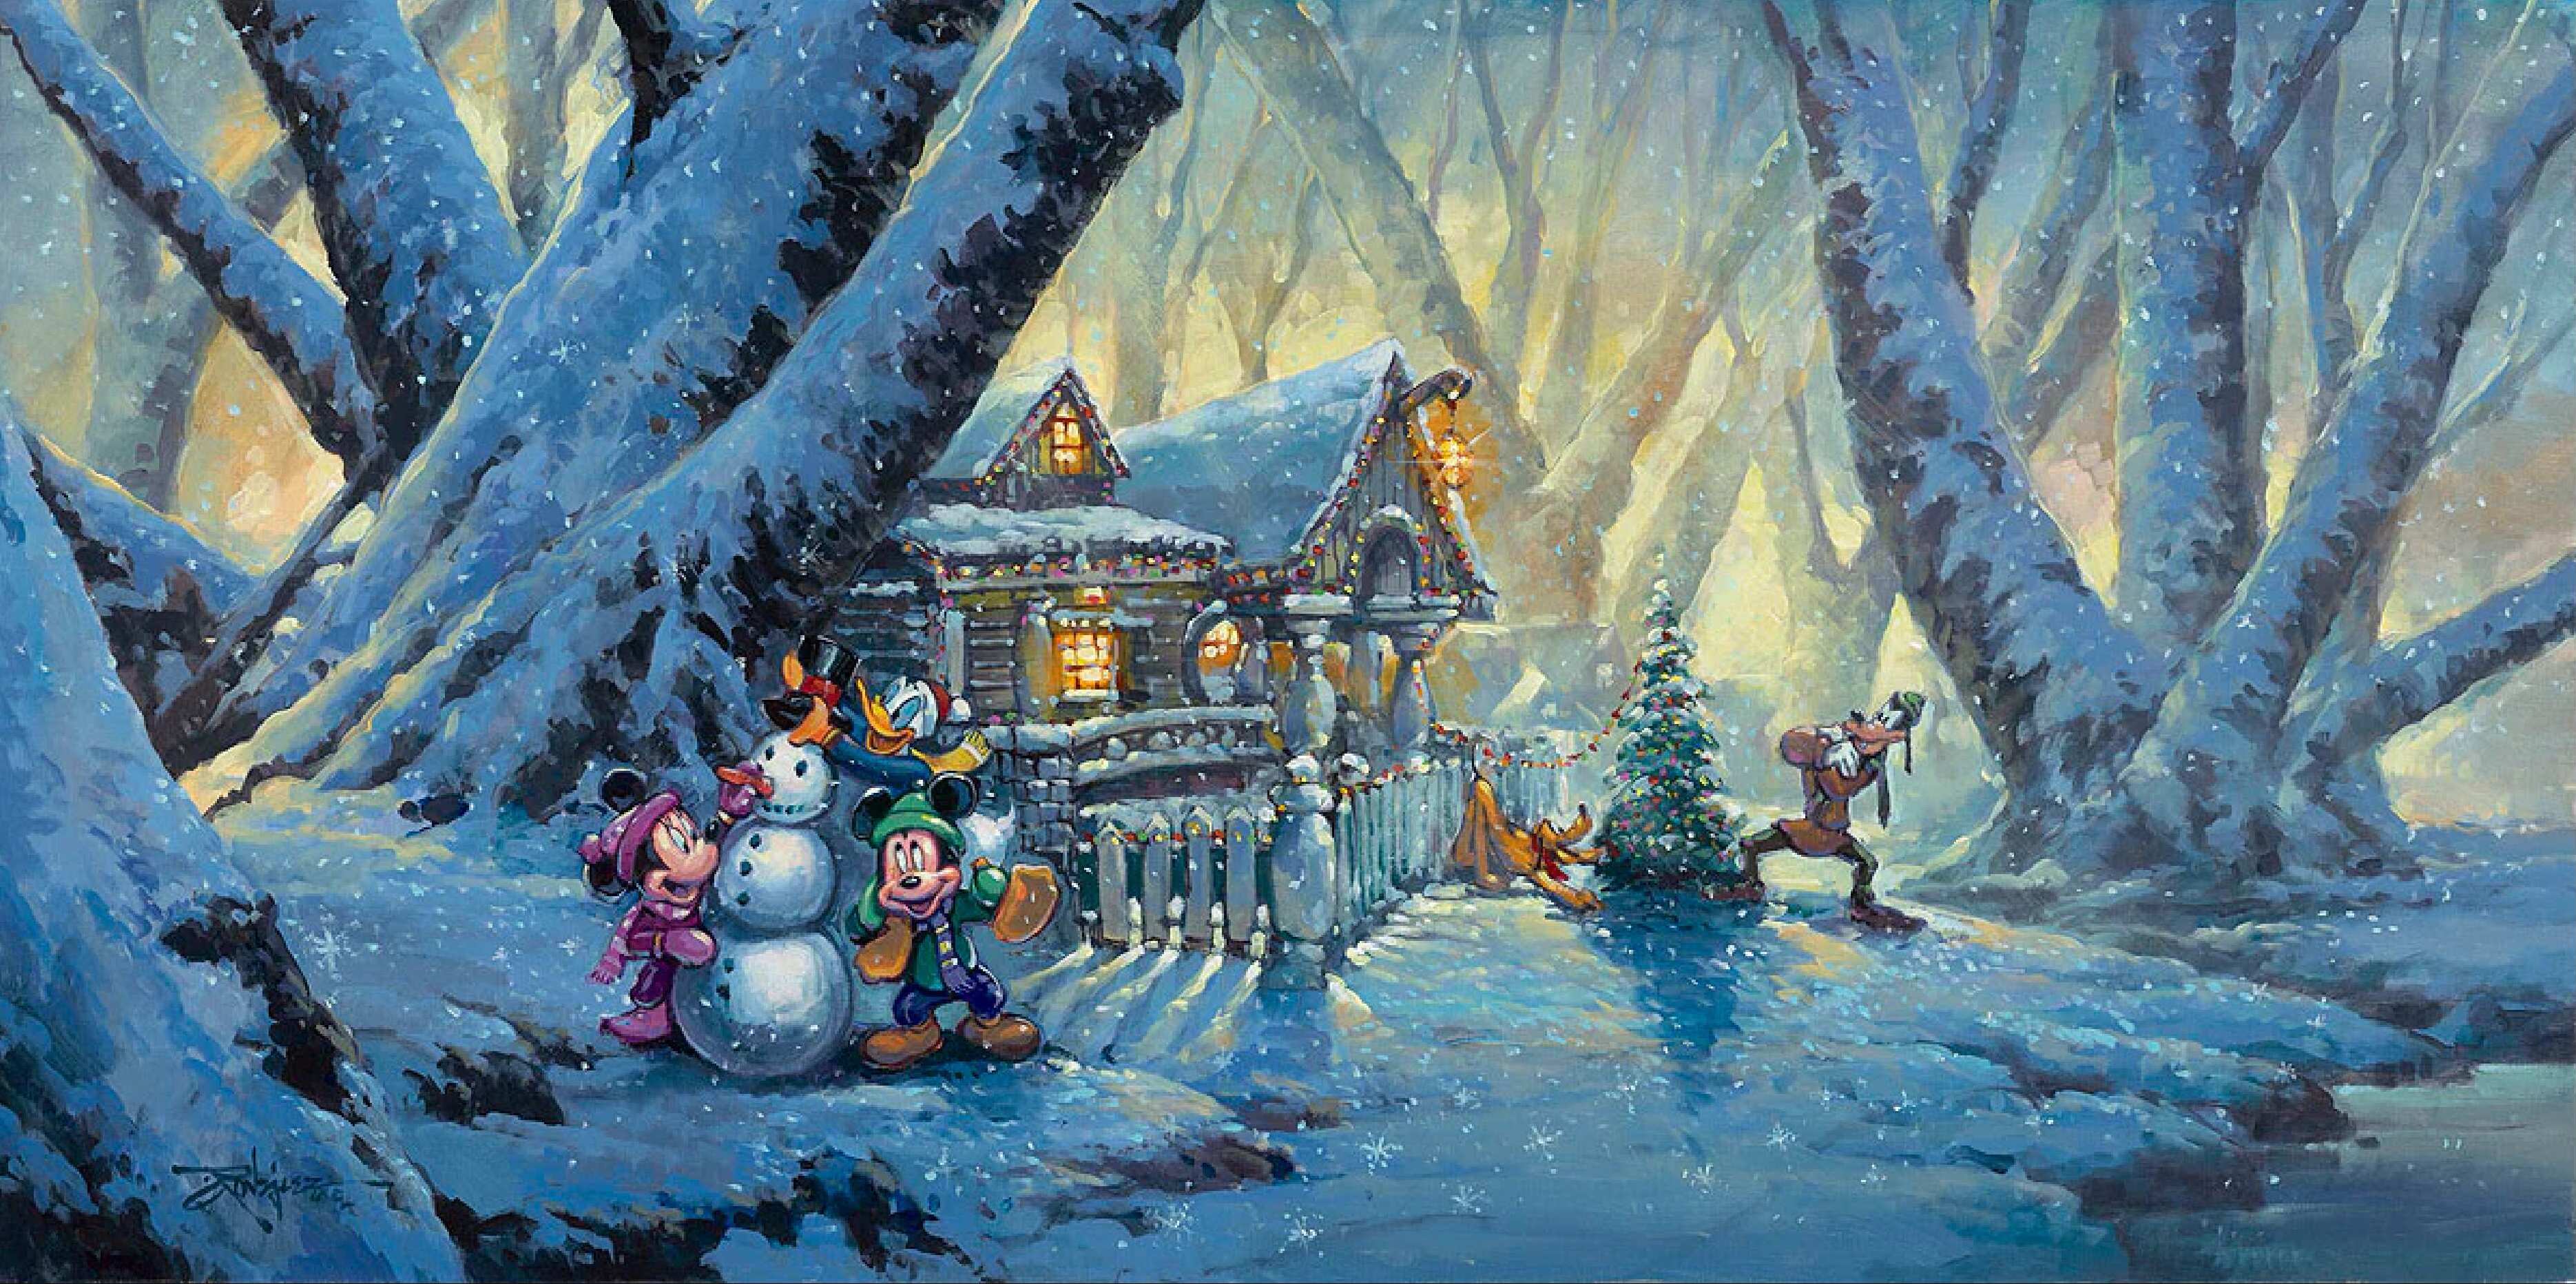 Mickey, Minnie, Goofy, and Donald as they come together outside a cozy cabin to build a snowman